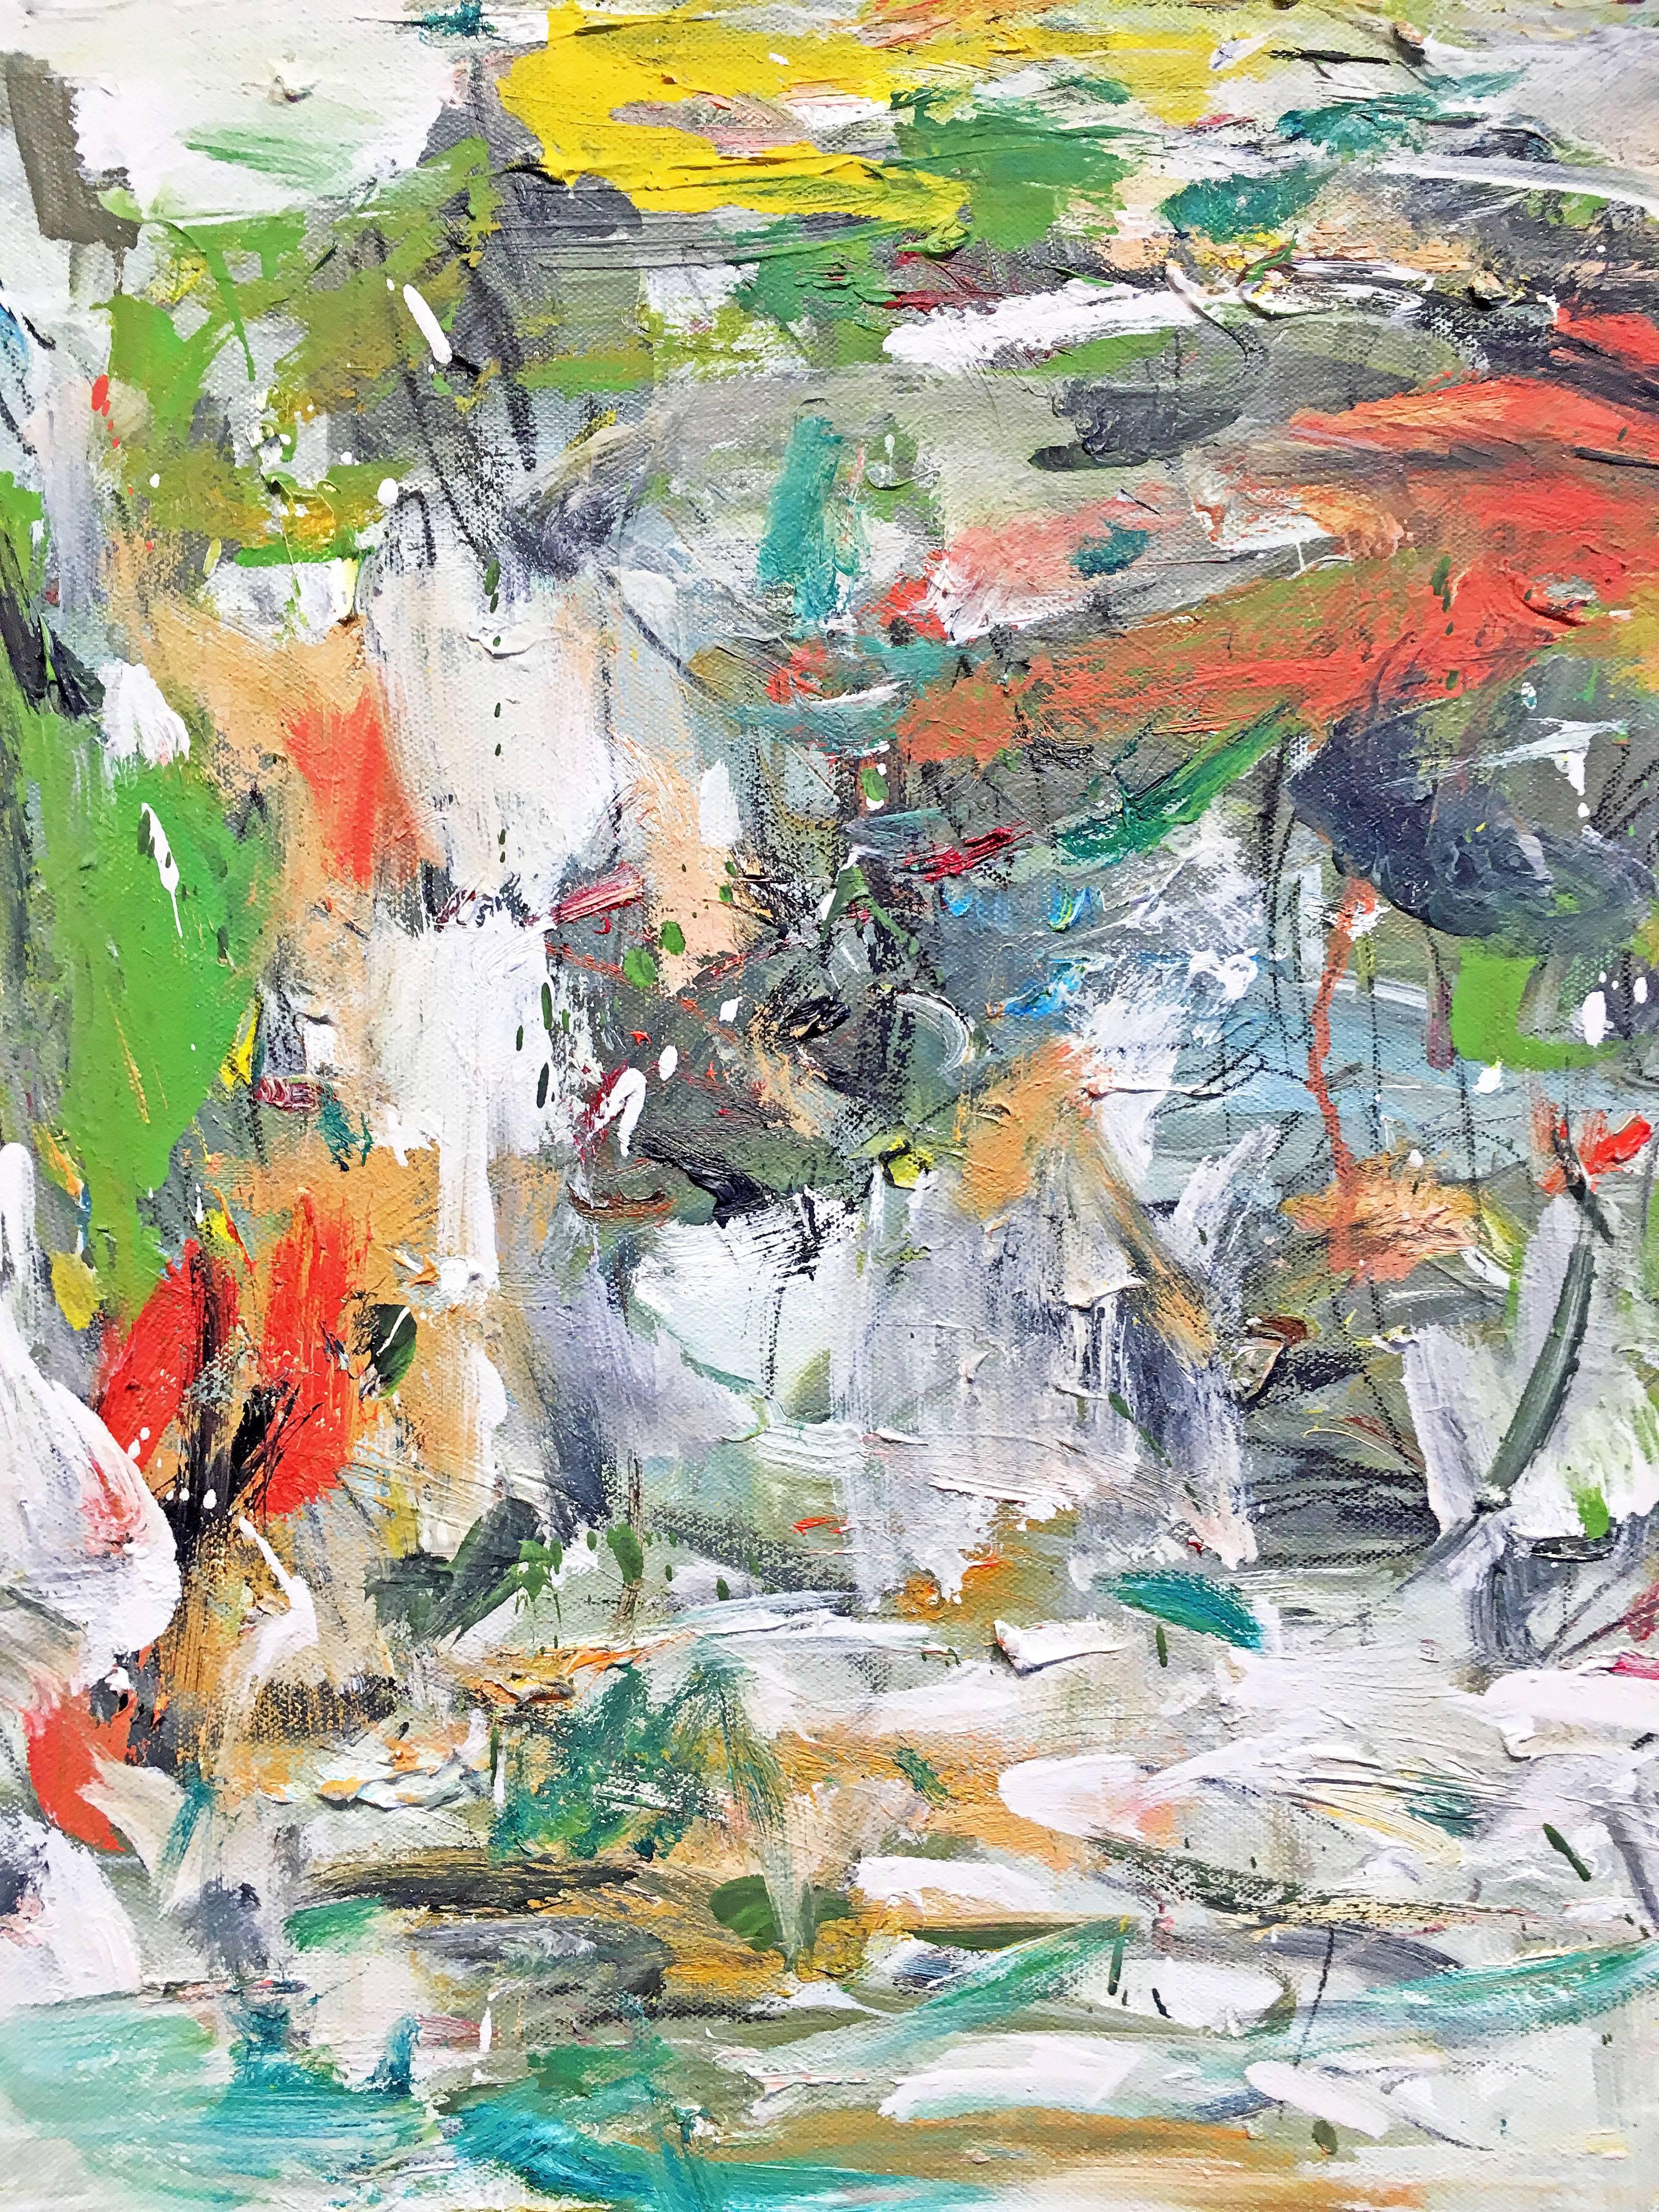 'Escape,' 2012, by Chinese/Canadian painter Yangyang Pan. Oil on canvas, 20 x 24 inches. This lush abstract painting incorporates large gestural brush strokes in various hues of green, yellow, orange, peach, and black. The expressive visual language